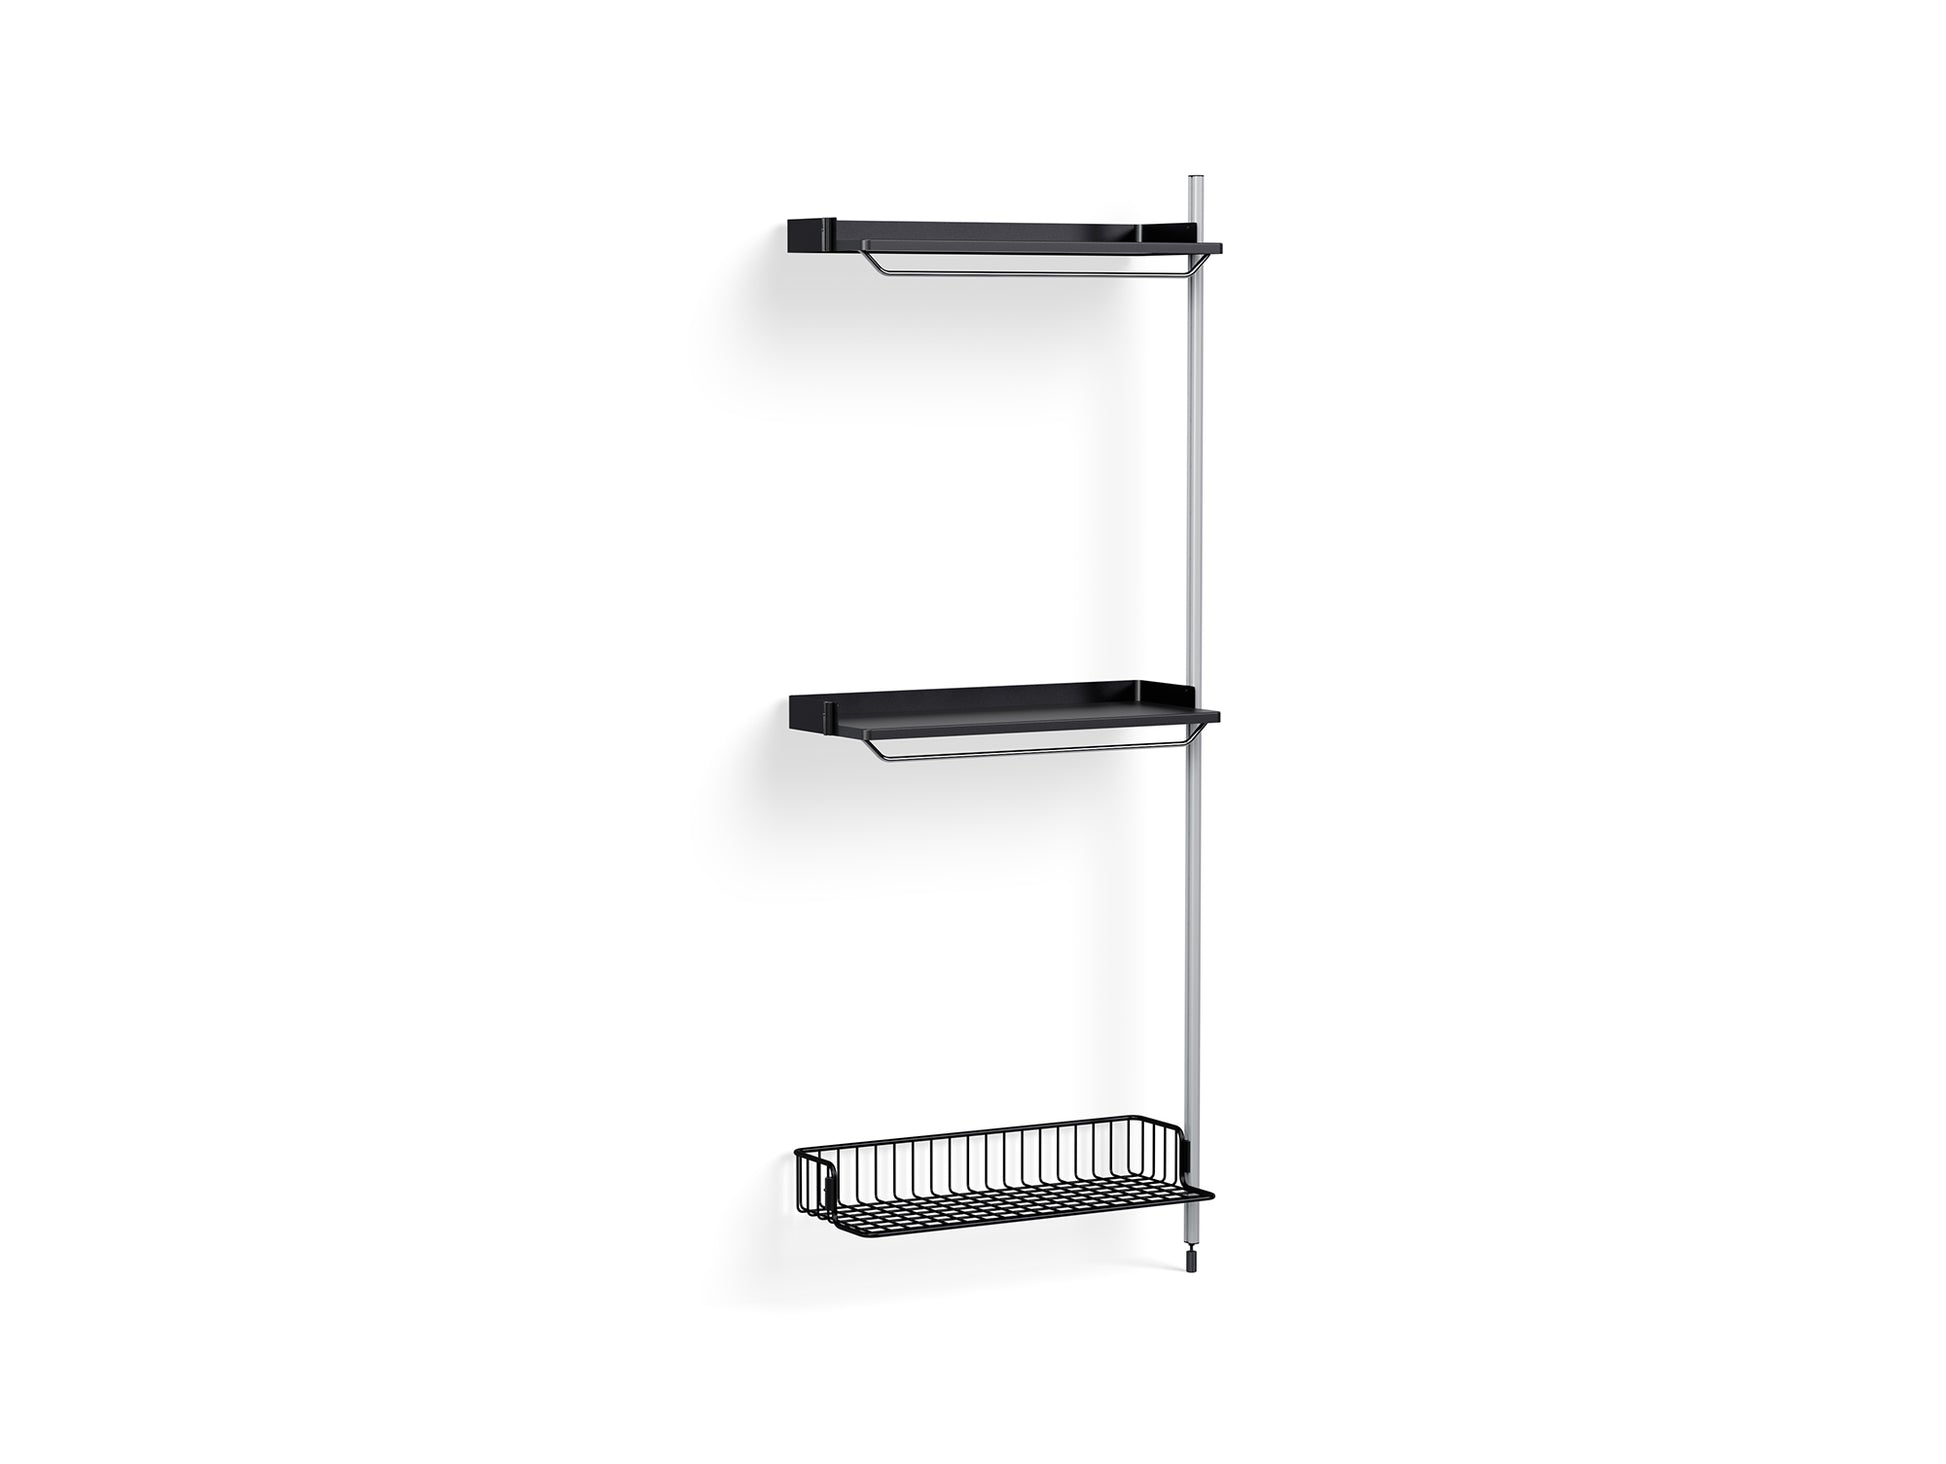 Pier System 1030 Add-ons by HAY - Clear Anodised Aluminium Uprights / PS Black with Anthracite Wire Shelf